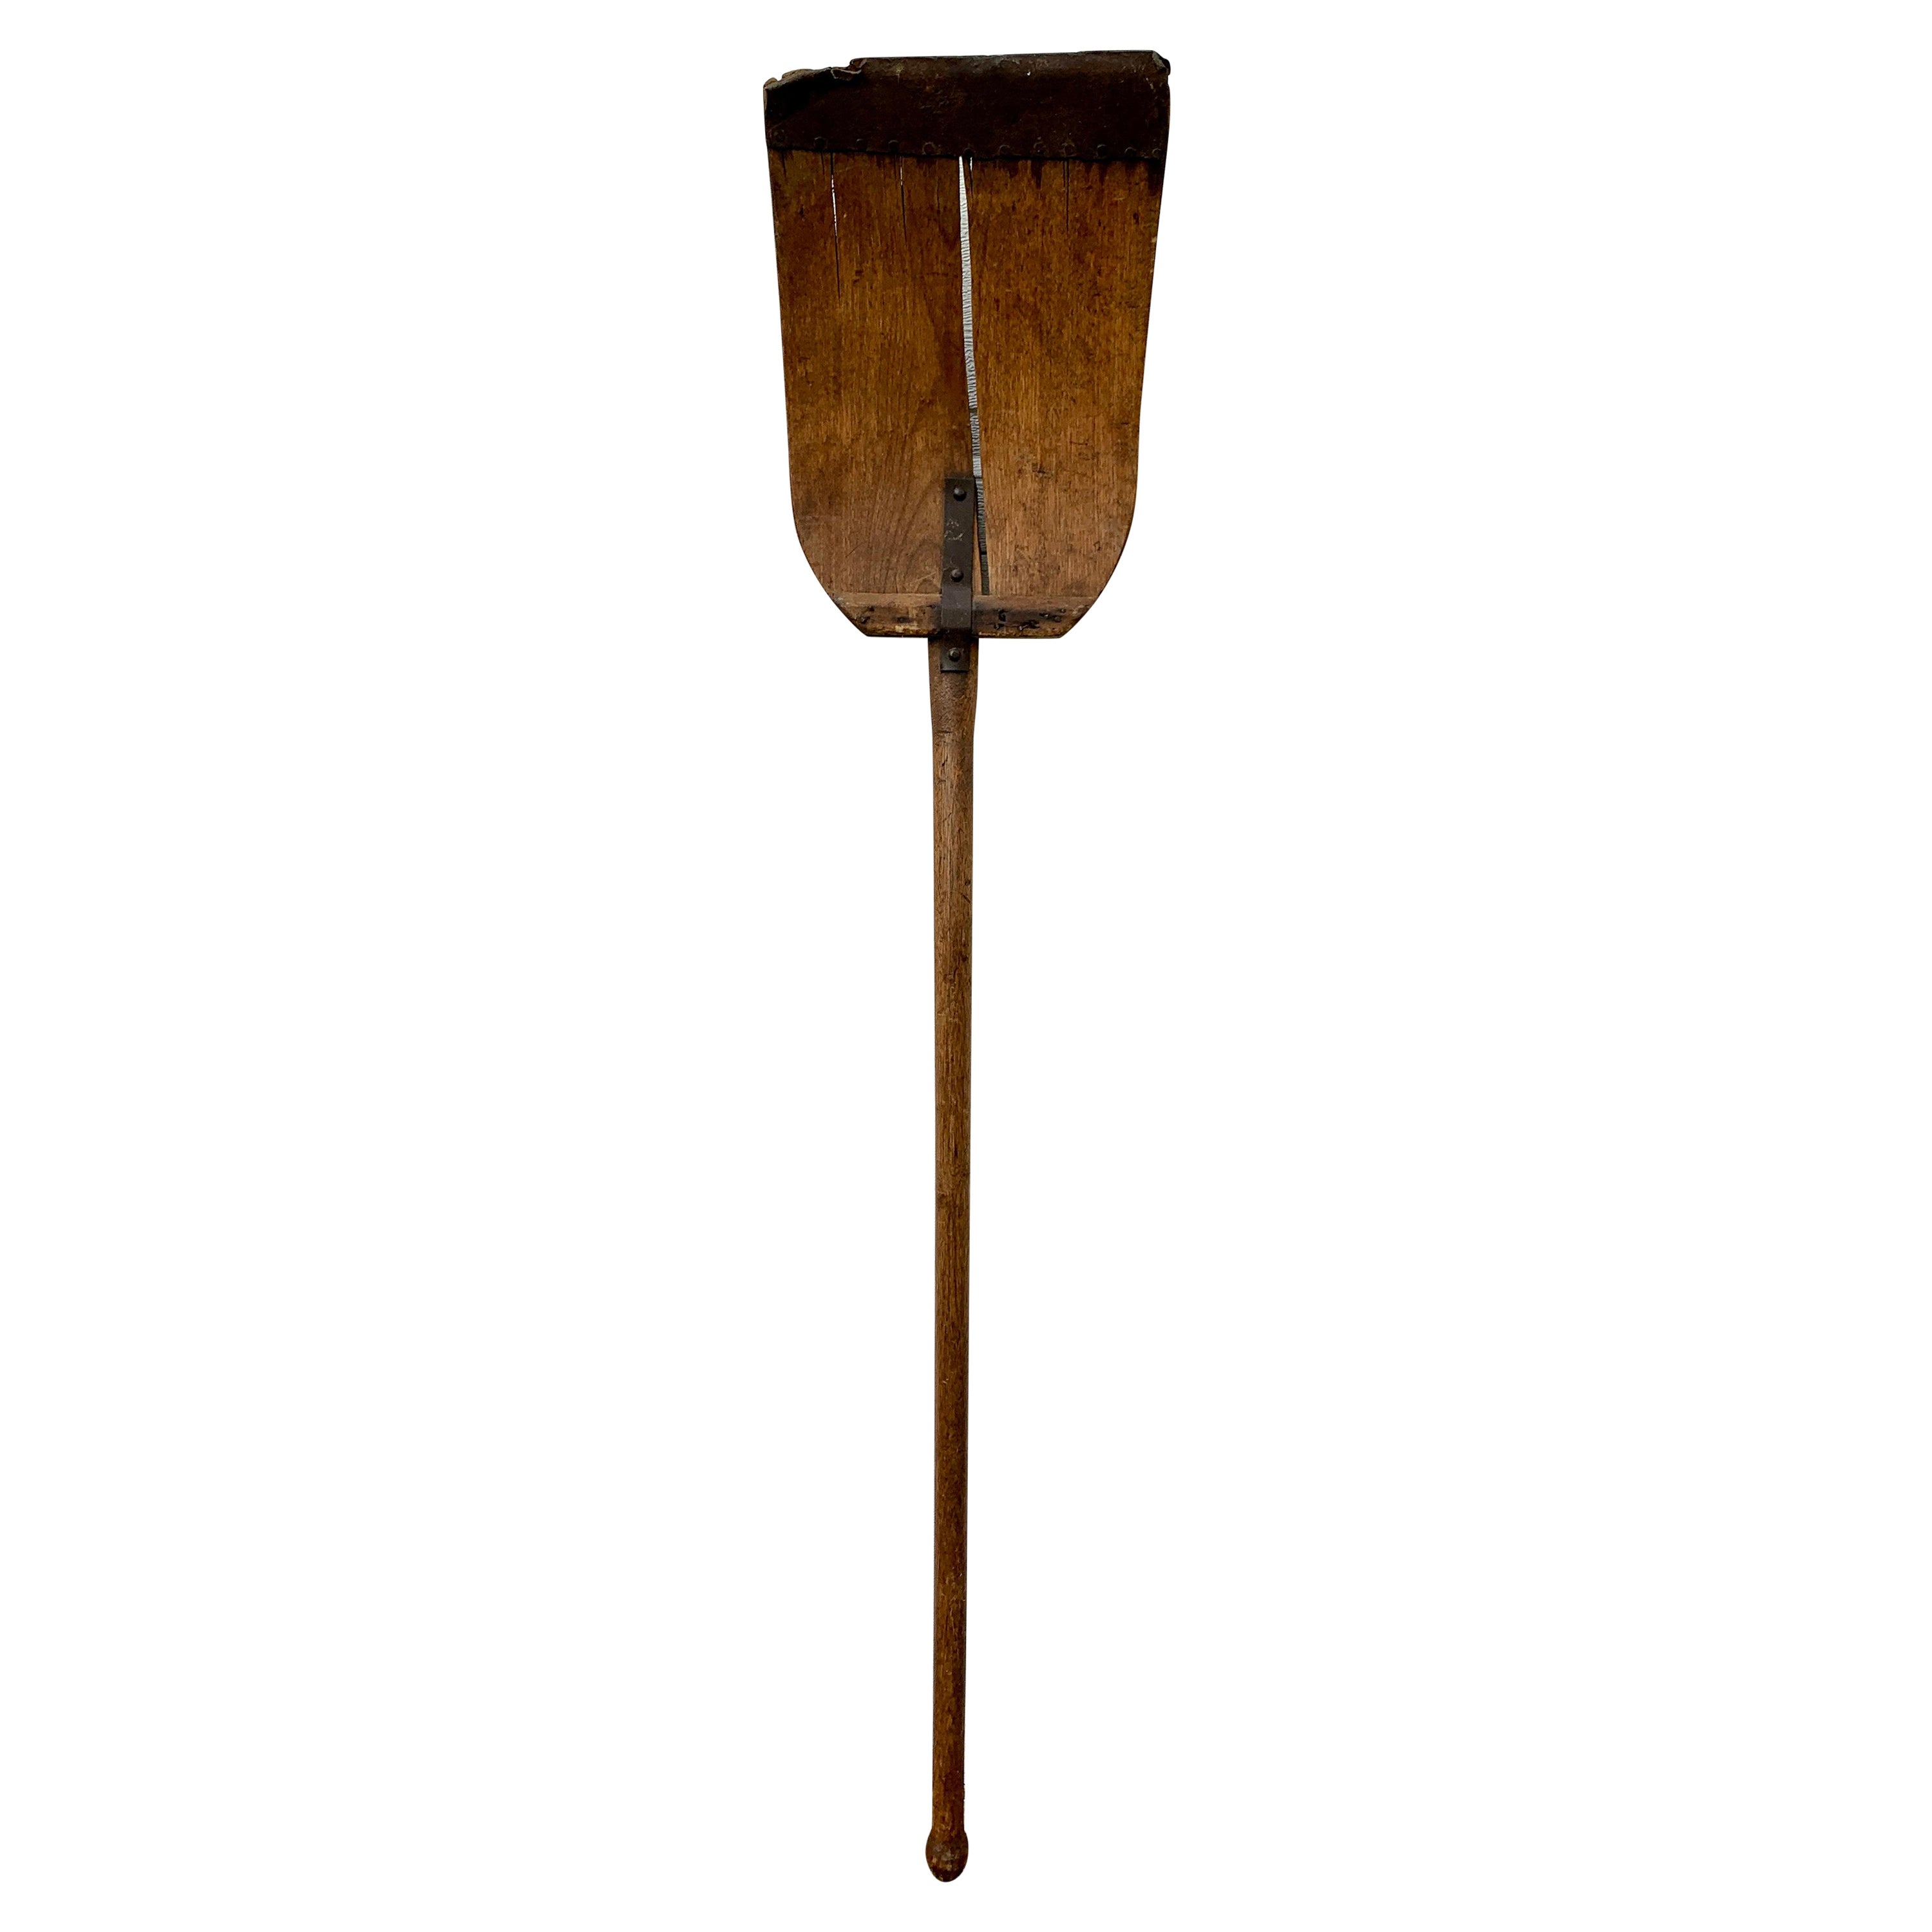 Antique 19th Century Hand Made Wooden Grain Shovel For Sale